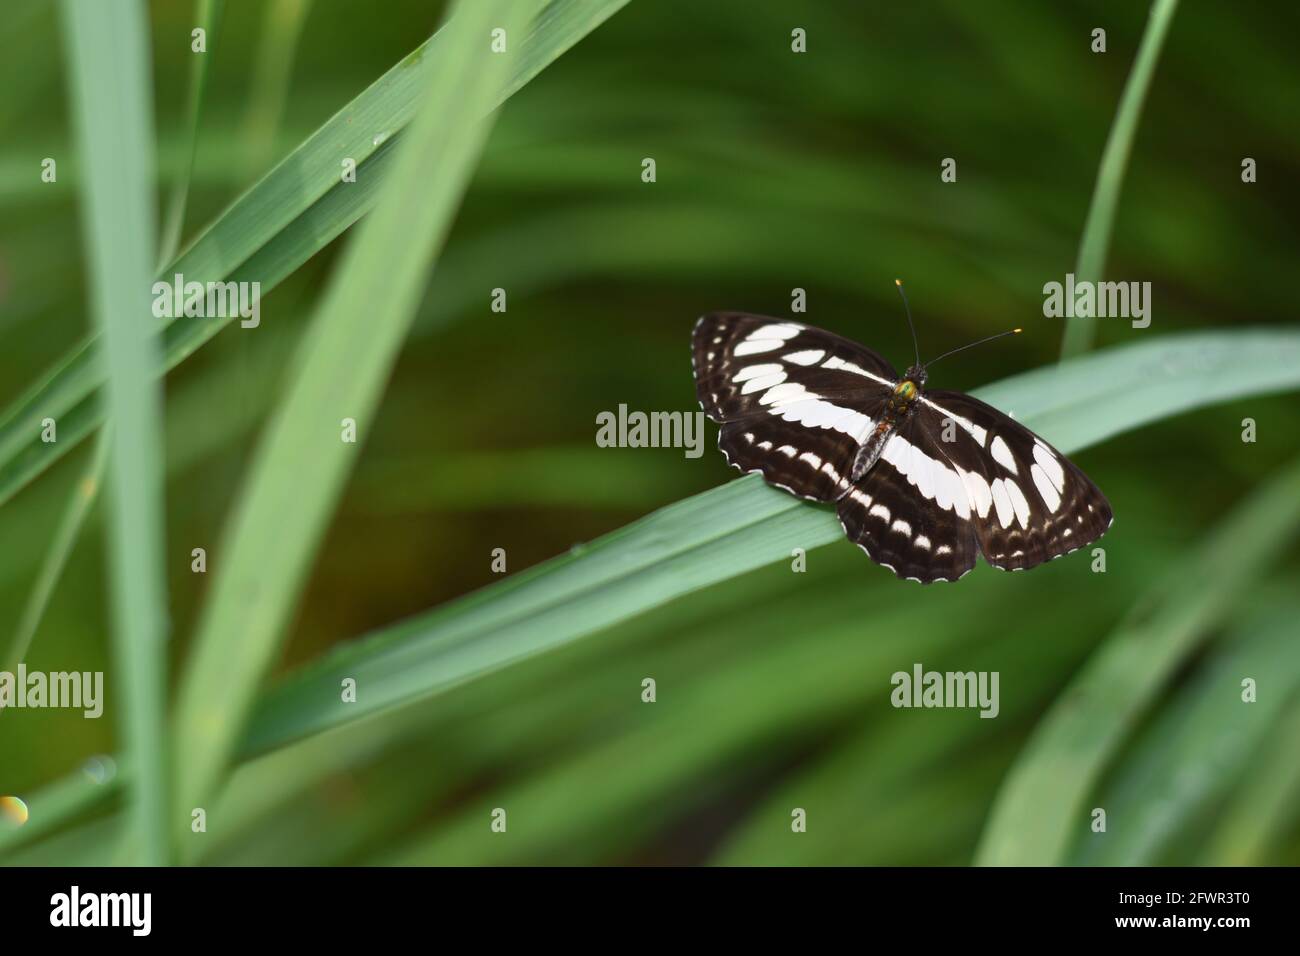 The common sailor (Neptis hylas) perched on green grass. Stock Photo